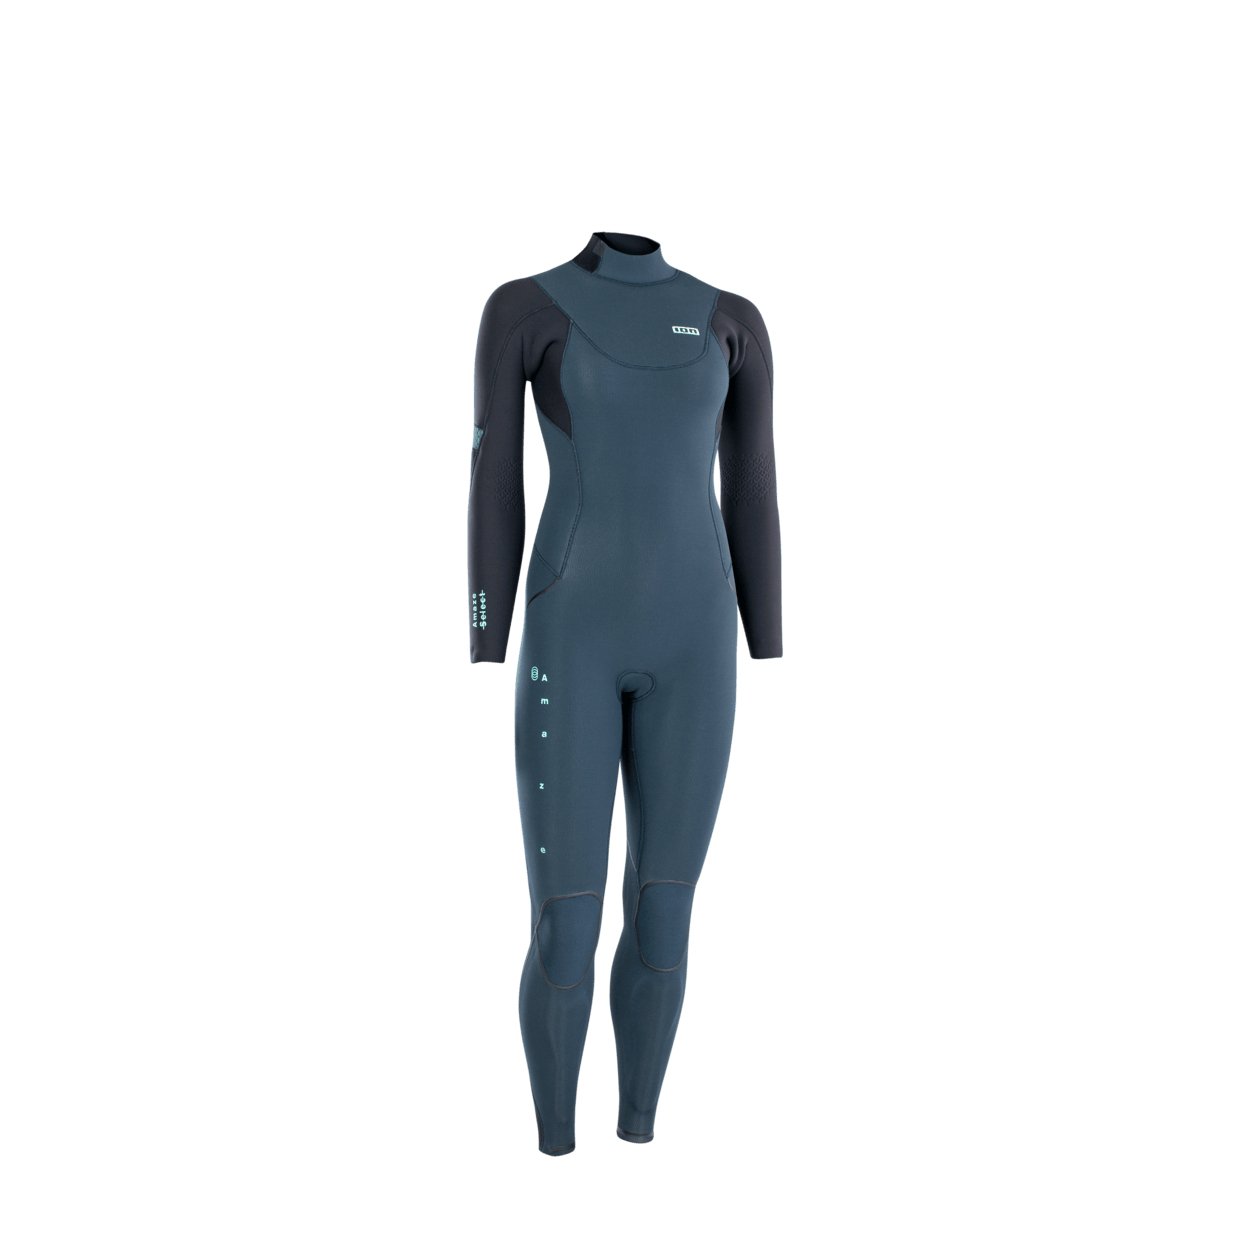 ION Women Wetsuit Amaze Select 5/4 Back Zip 2023 - Worthing Watersports - 9010583057361 - Wetsuits - ION Water